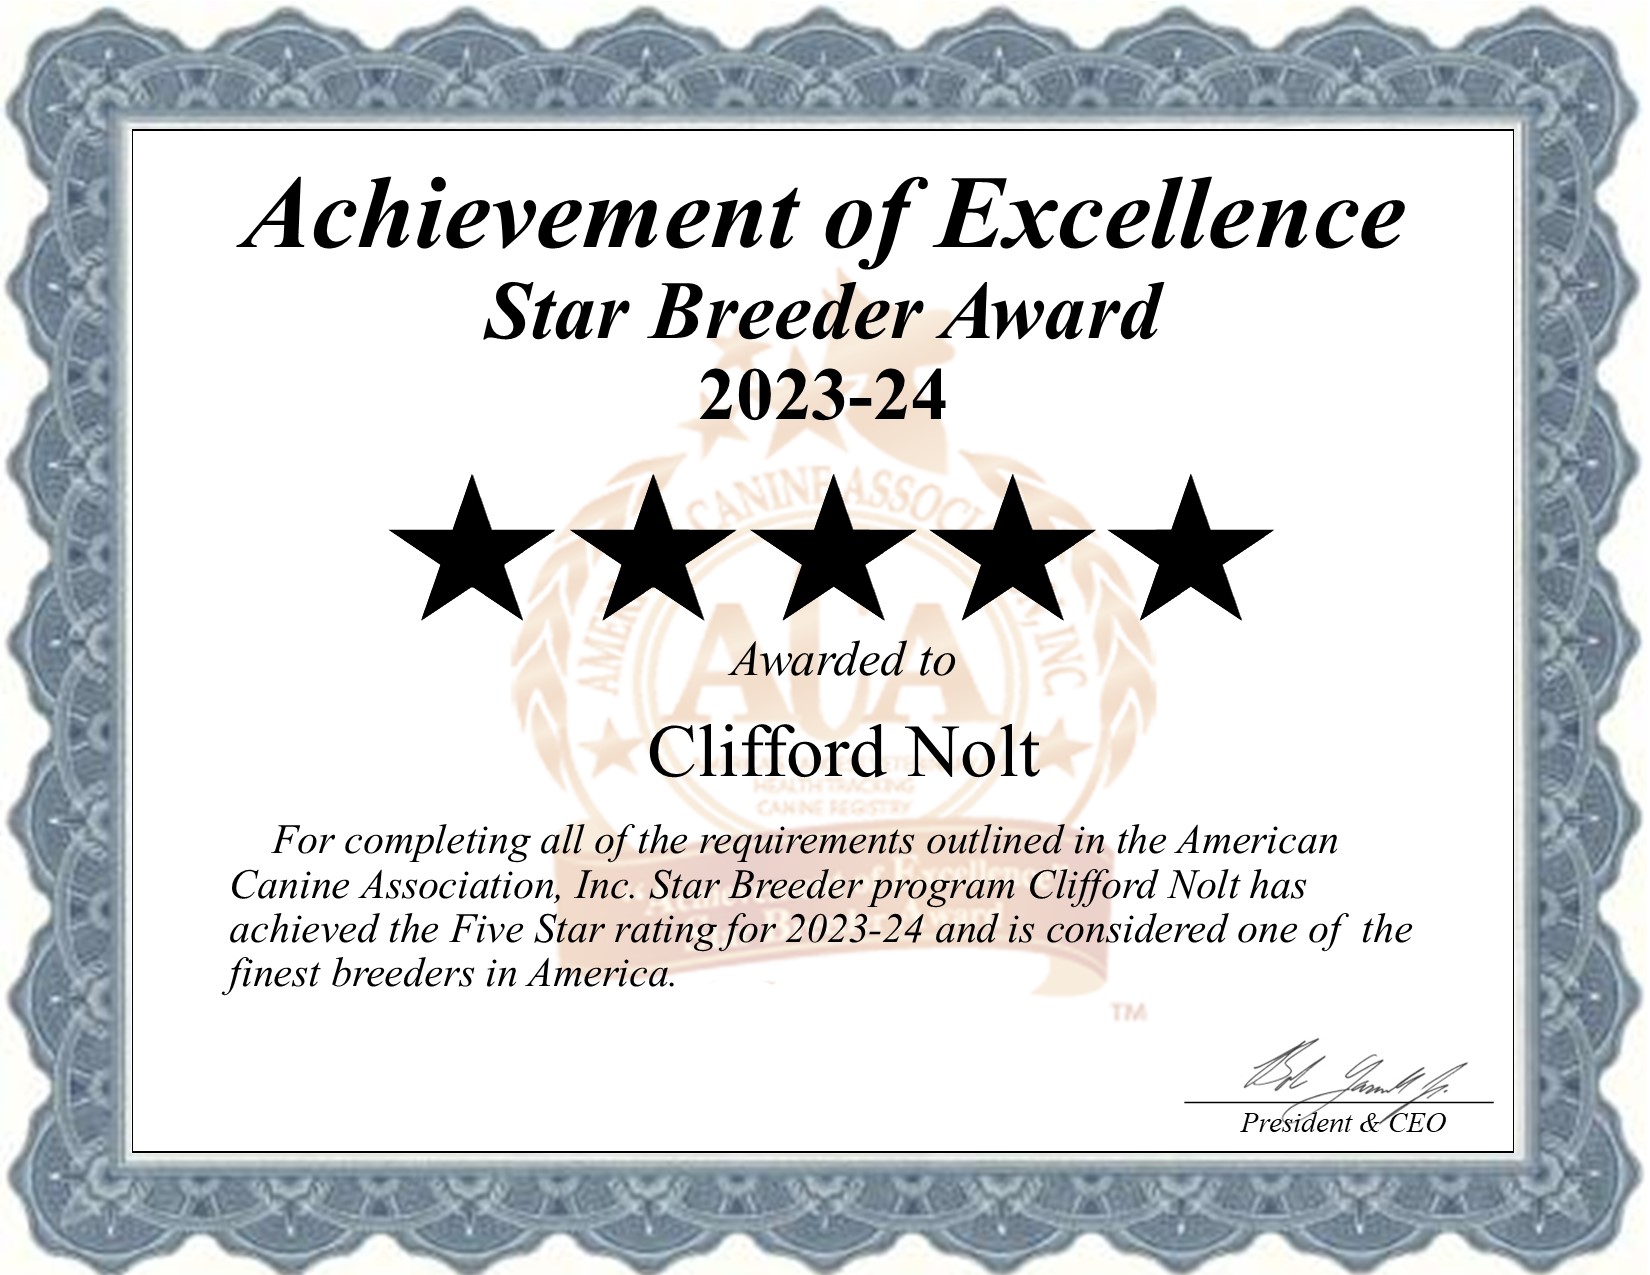 Clifford, Nolt, dog, breeder, star, certificate, Clifford-Nolt, East Earl, PA, Pennsylvania, puppy, dog, kennels, mill, puppymill, usda, 5-star, aca, ica, registered, Chihuahua, none